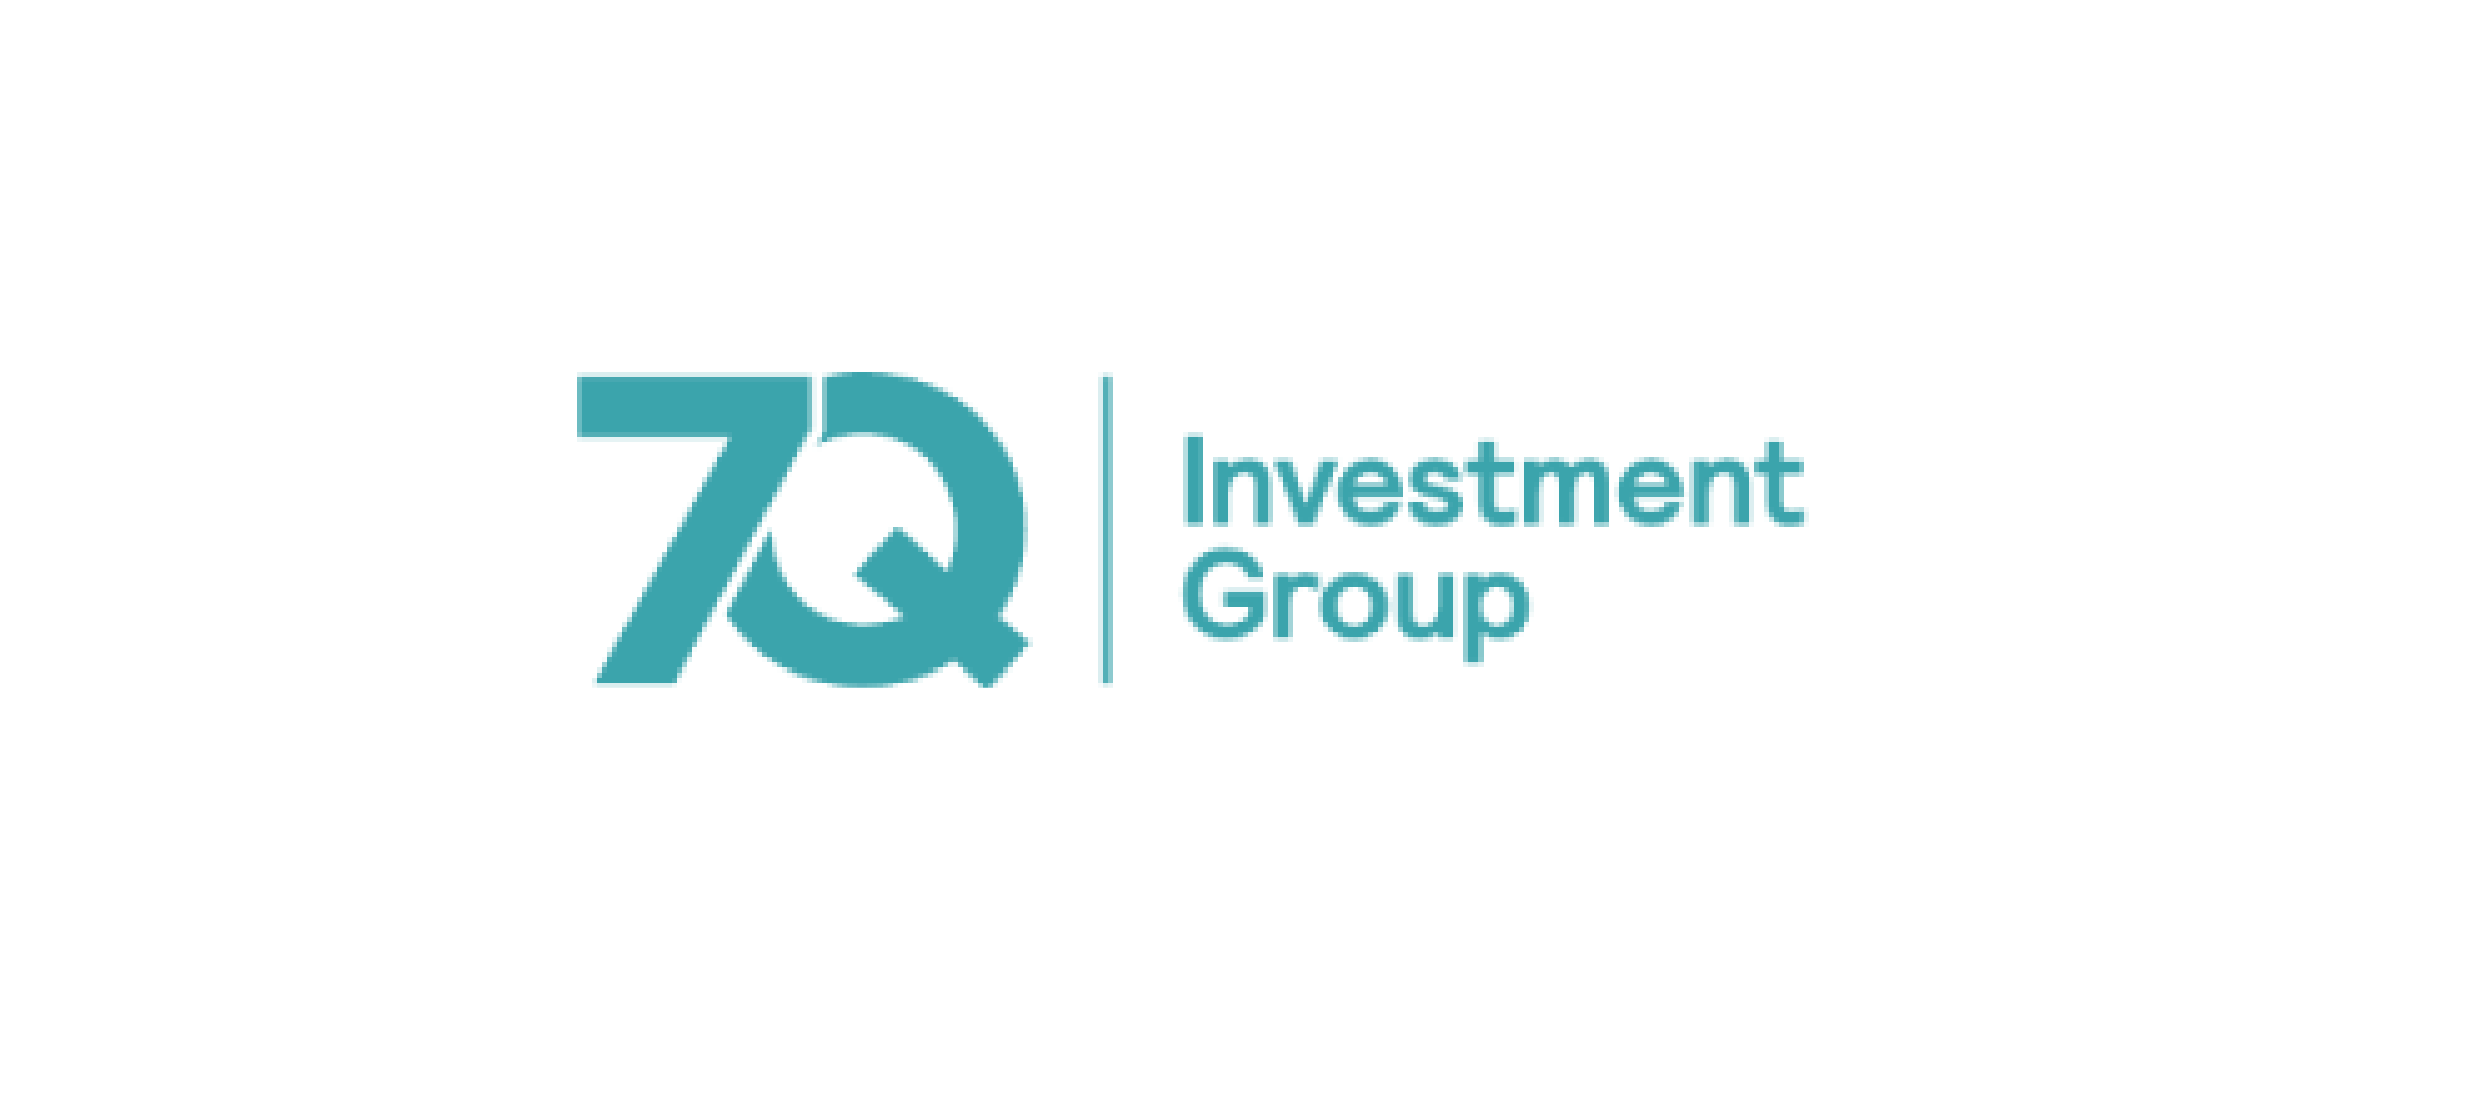 7Q Investment Group – Client Feedback